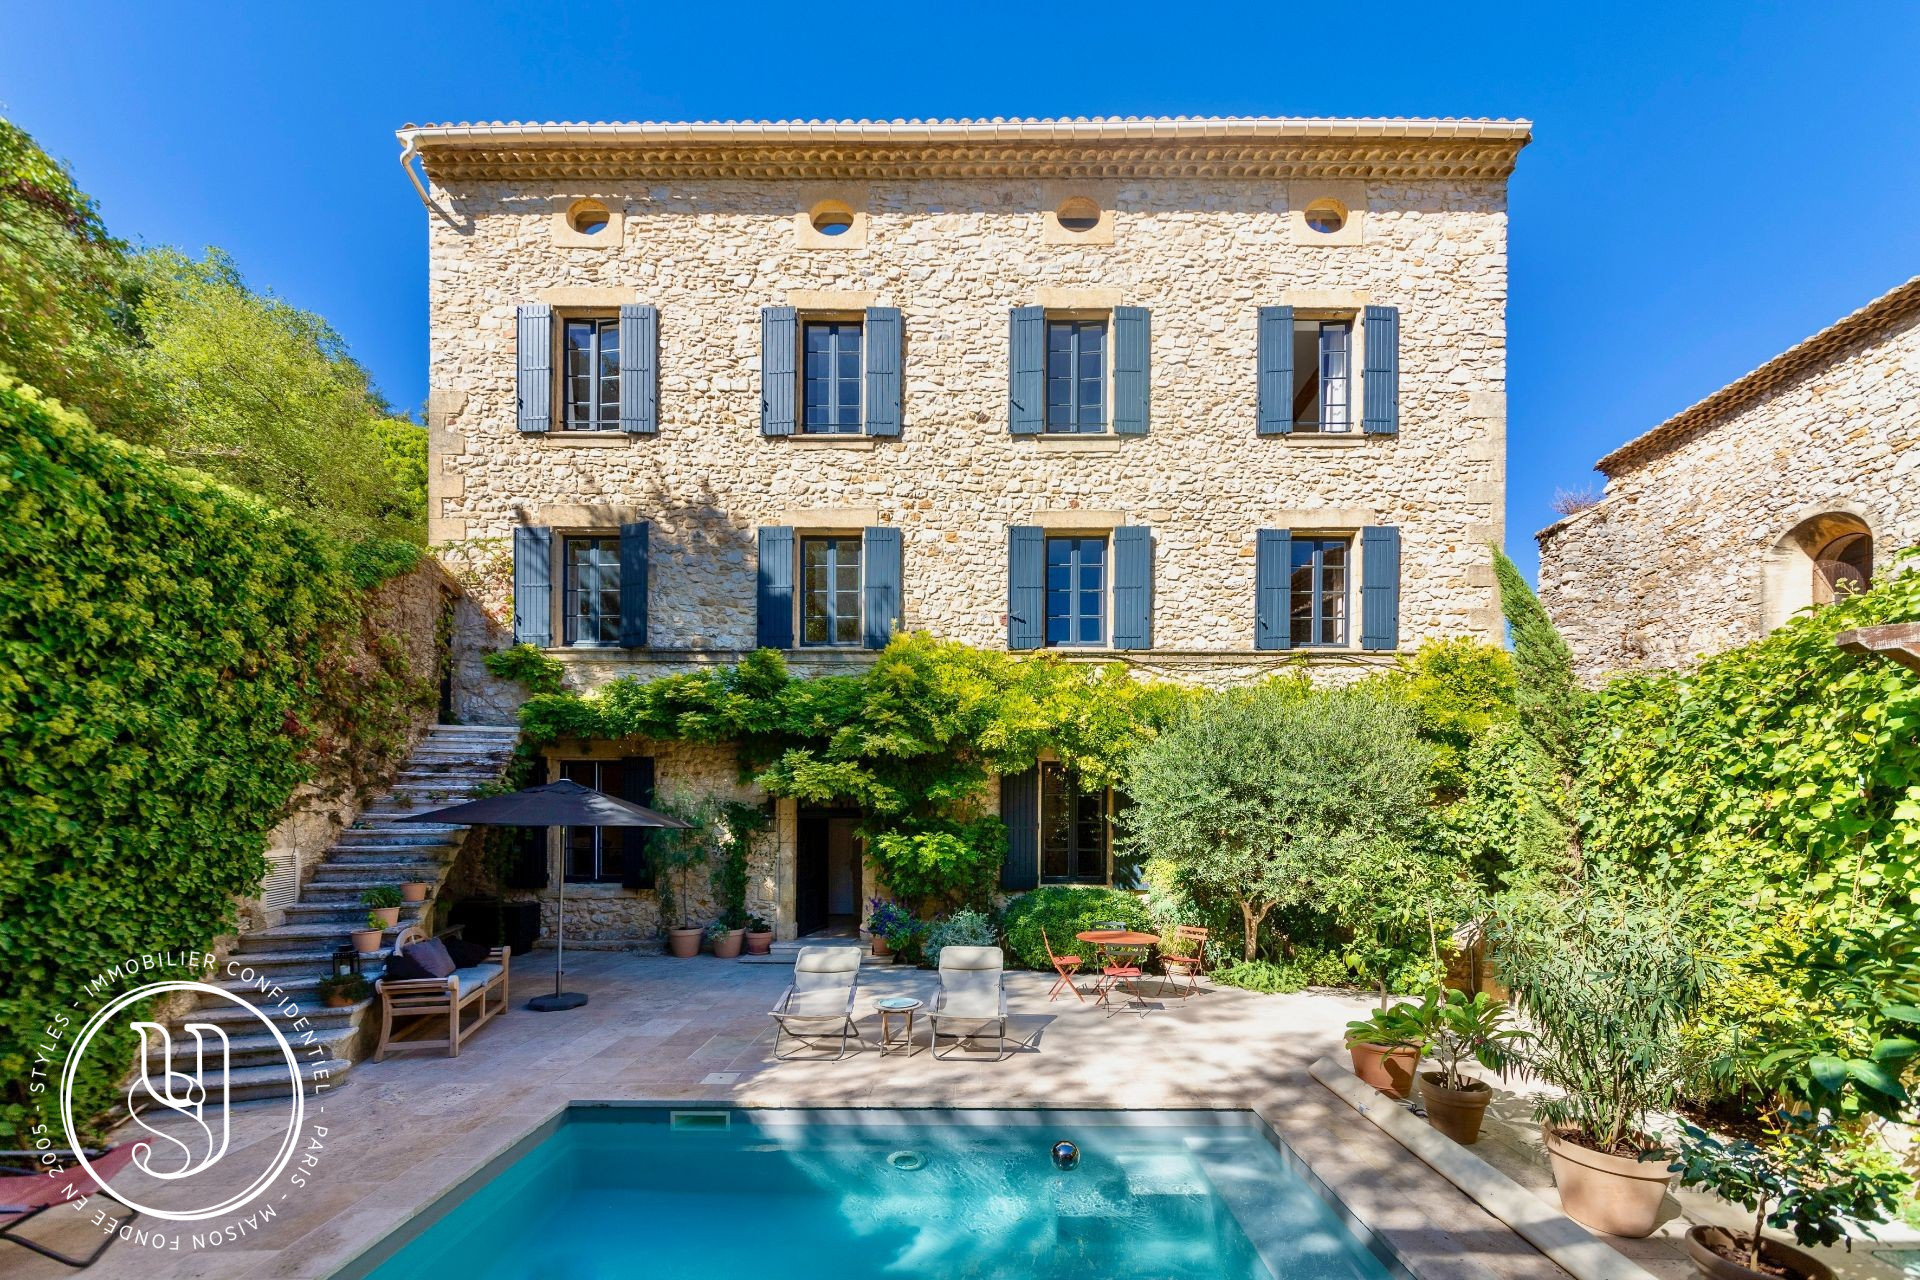 Uzes - surroundings, sold by S T Y LE S, a beautiful, refined and ele - image 6